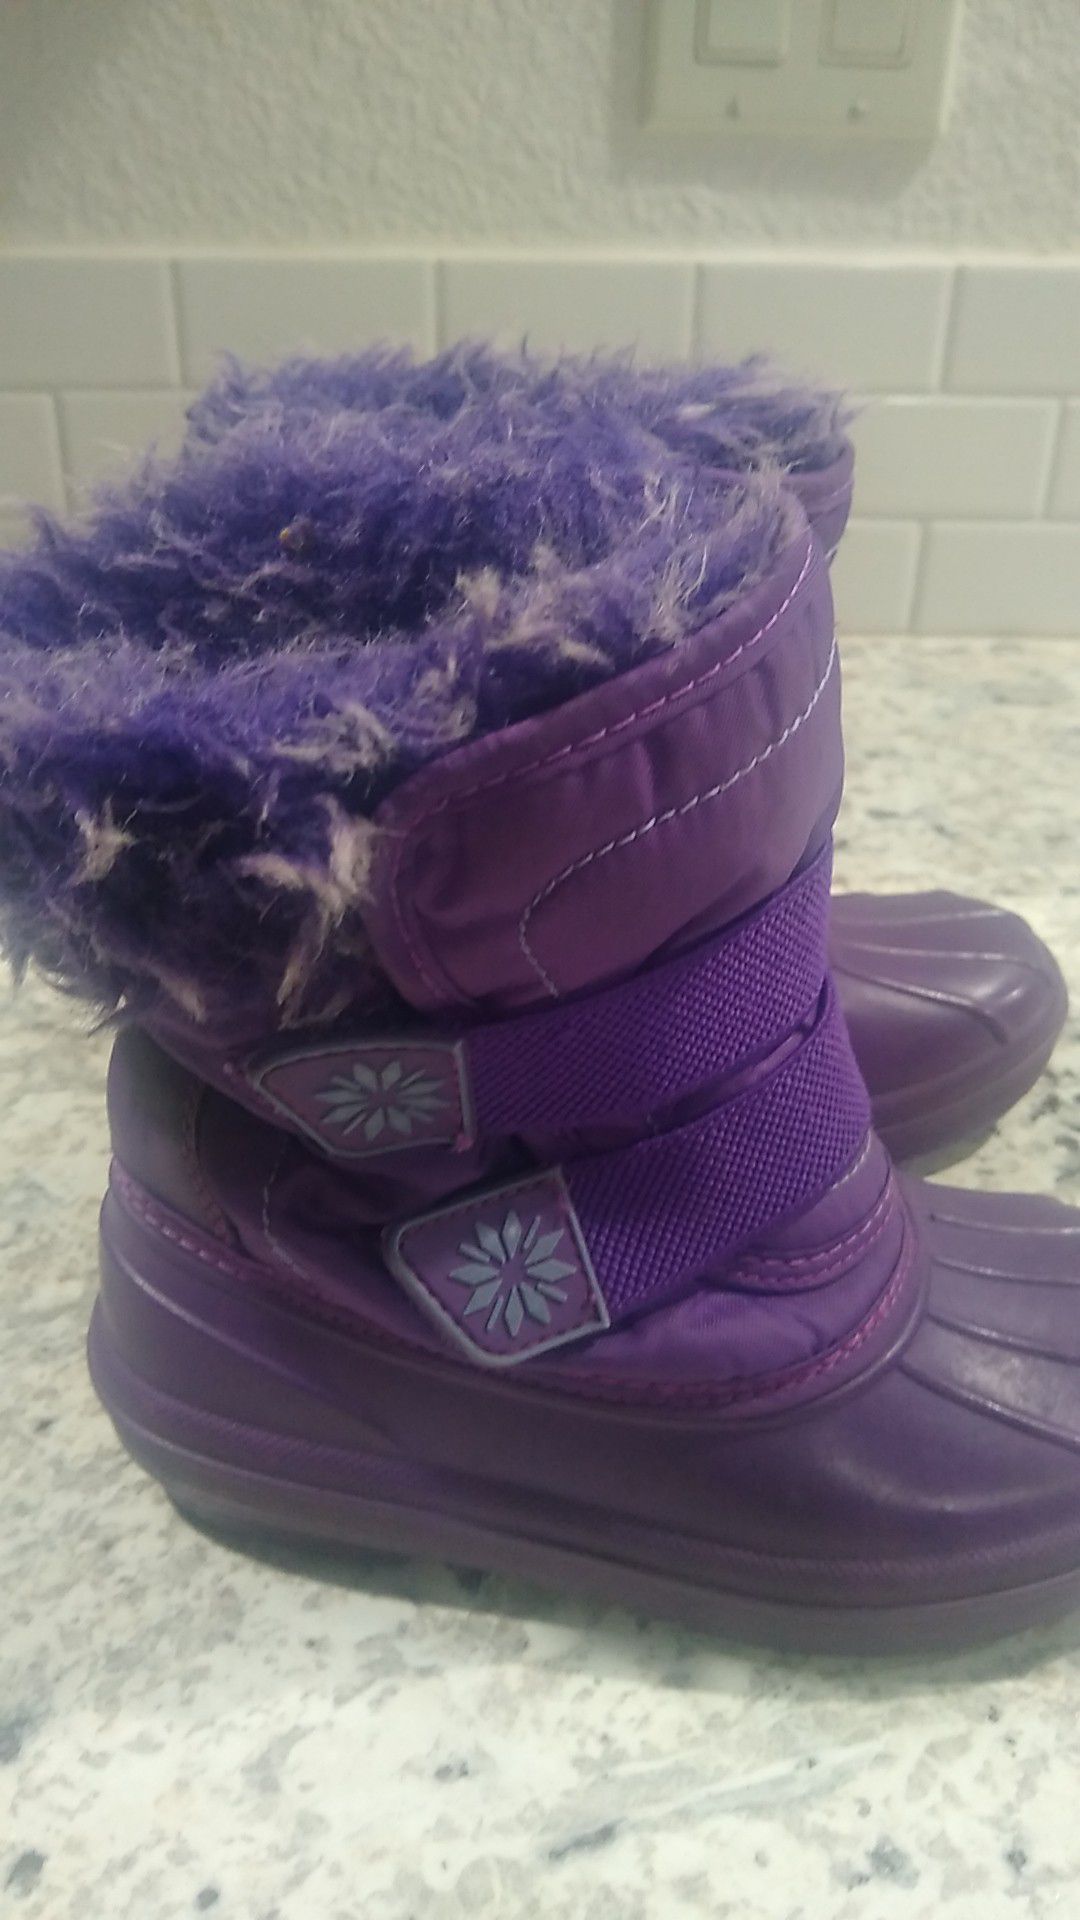 Girls winter boots size 9/10